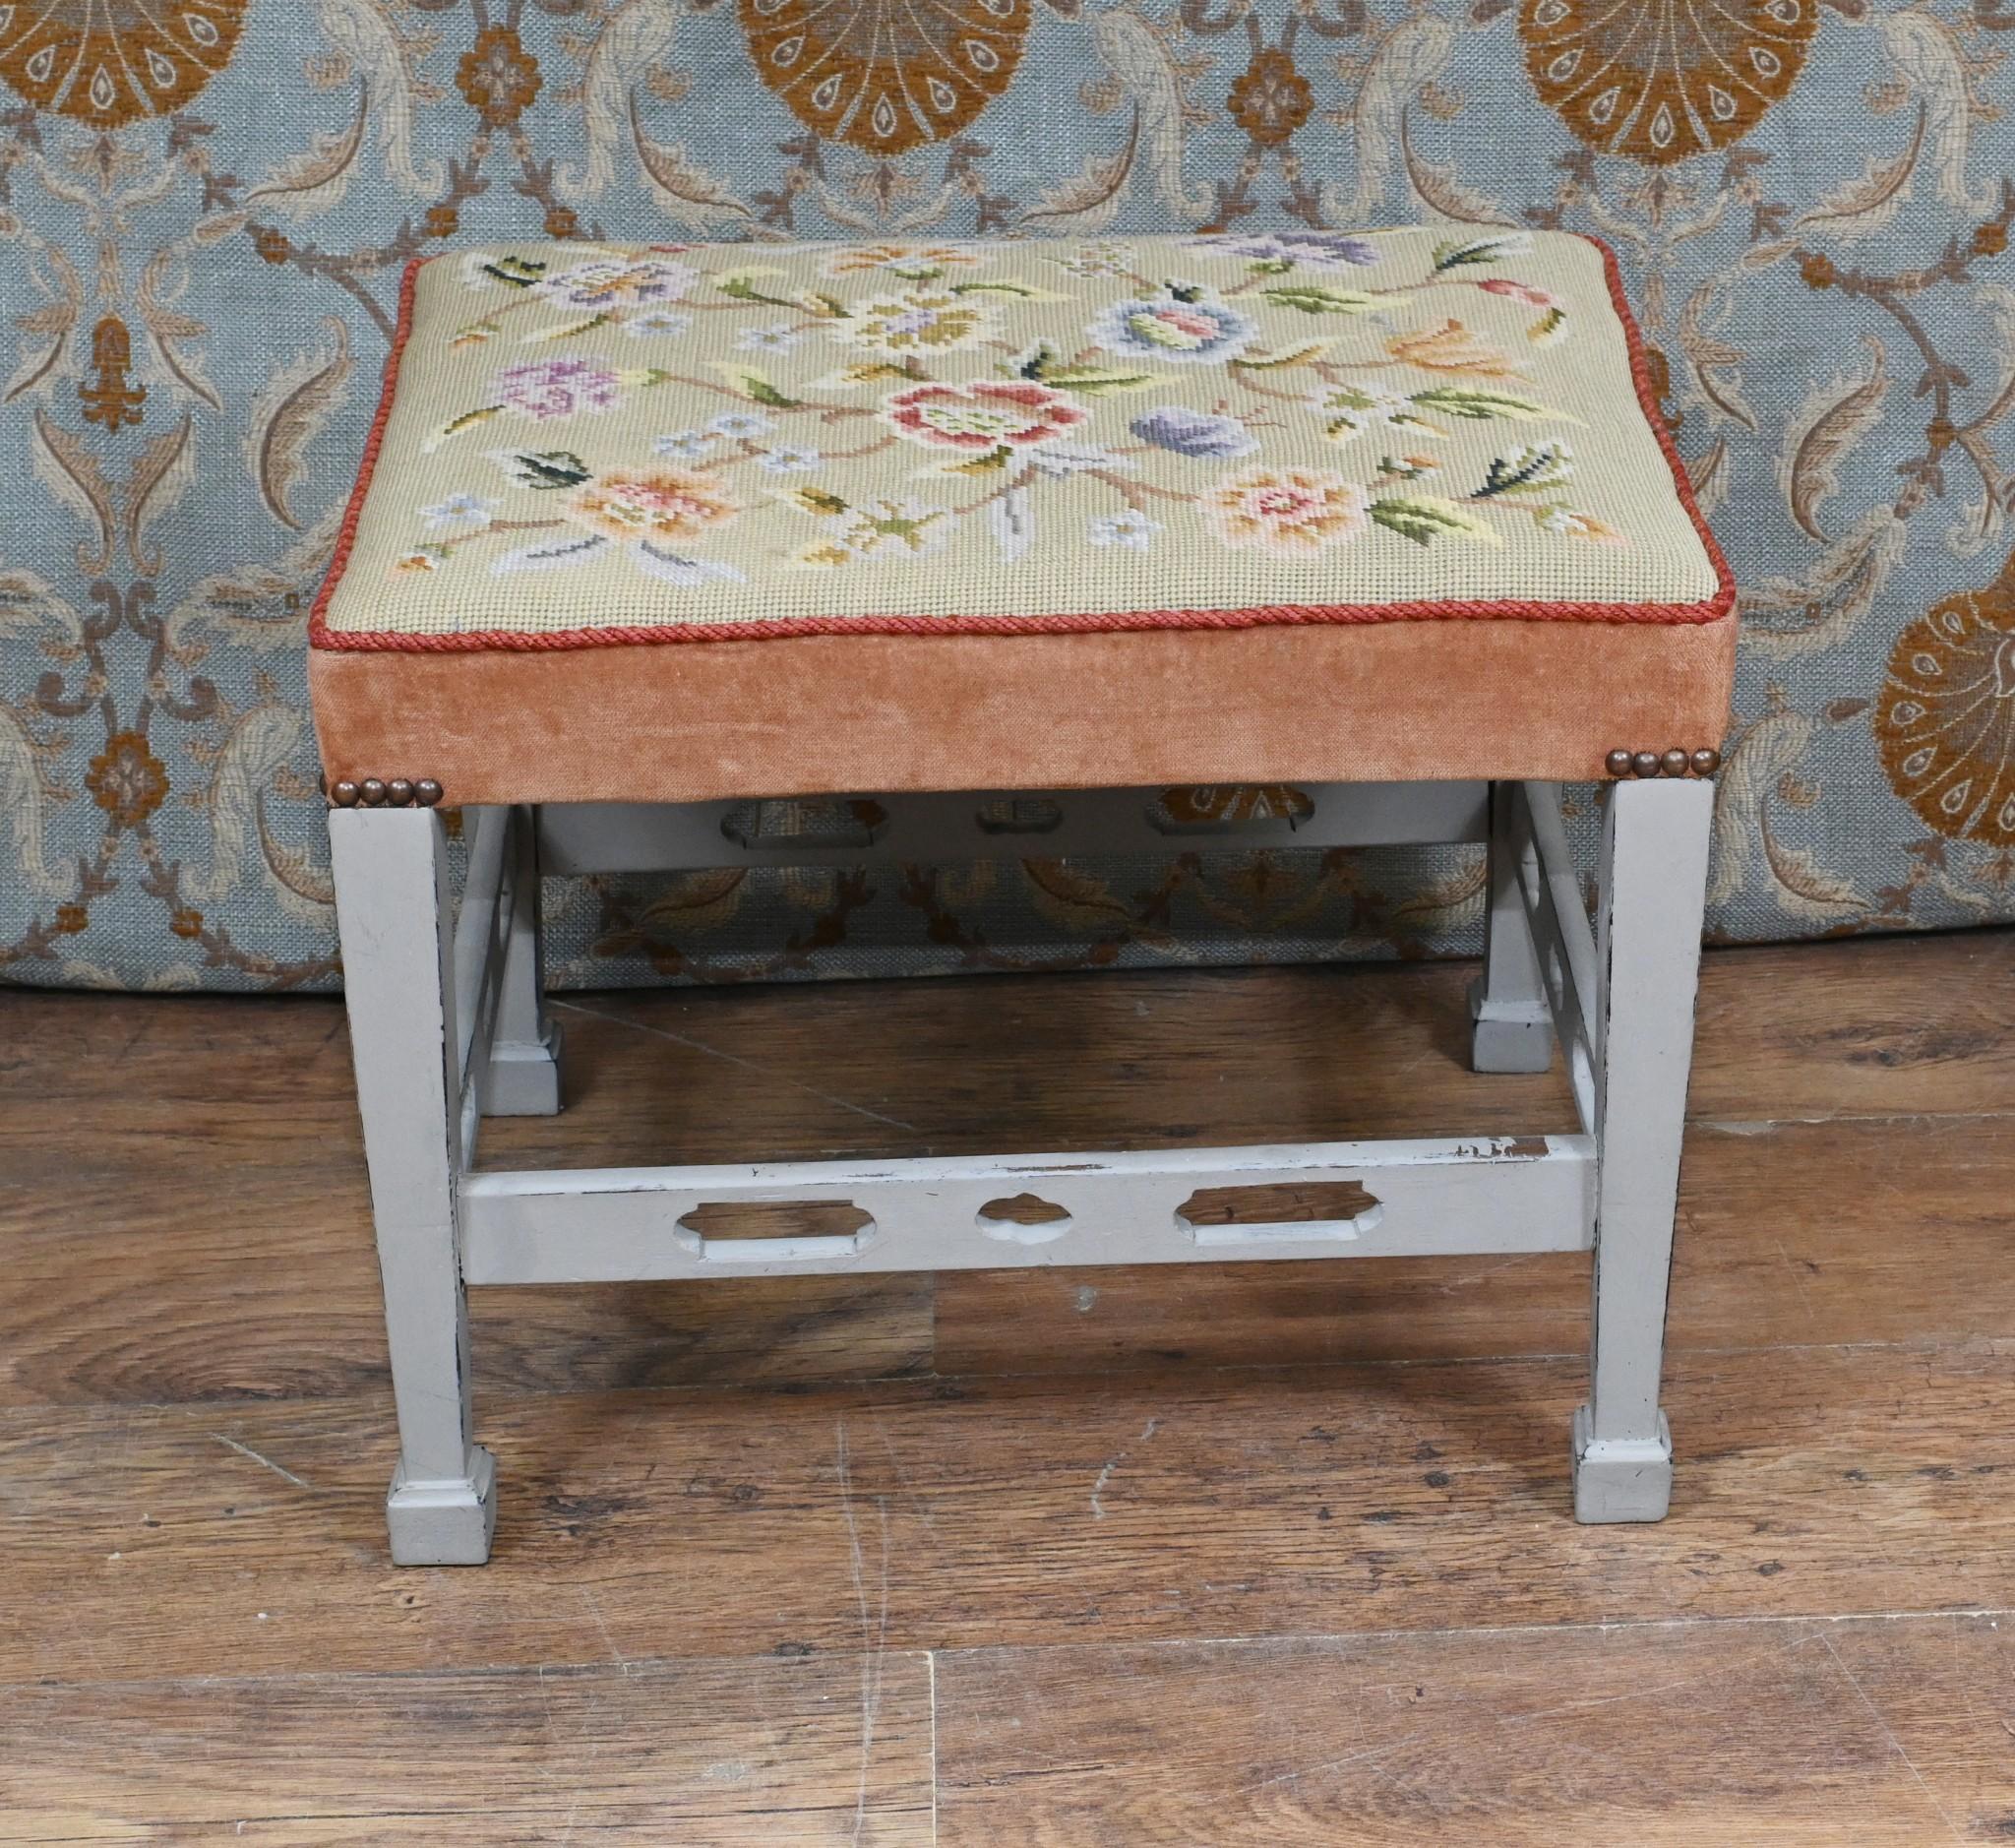 Gorgeous painted Edwardian stool
Features a handwoven floral tapestry design to the top, very intricate needlepoint work
Great interiors piece
Viewings available by appointment
Offered in great shape ready for home use right away - there is a slight